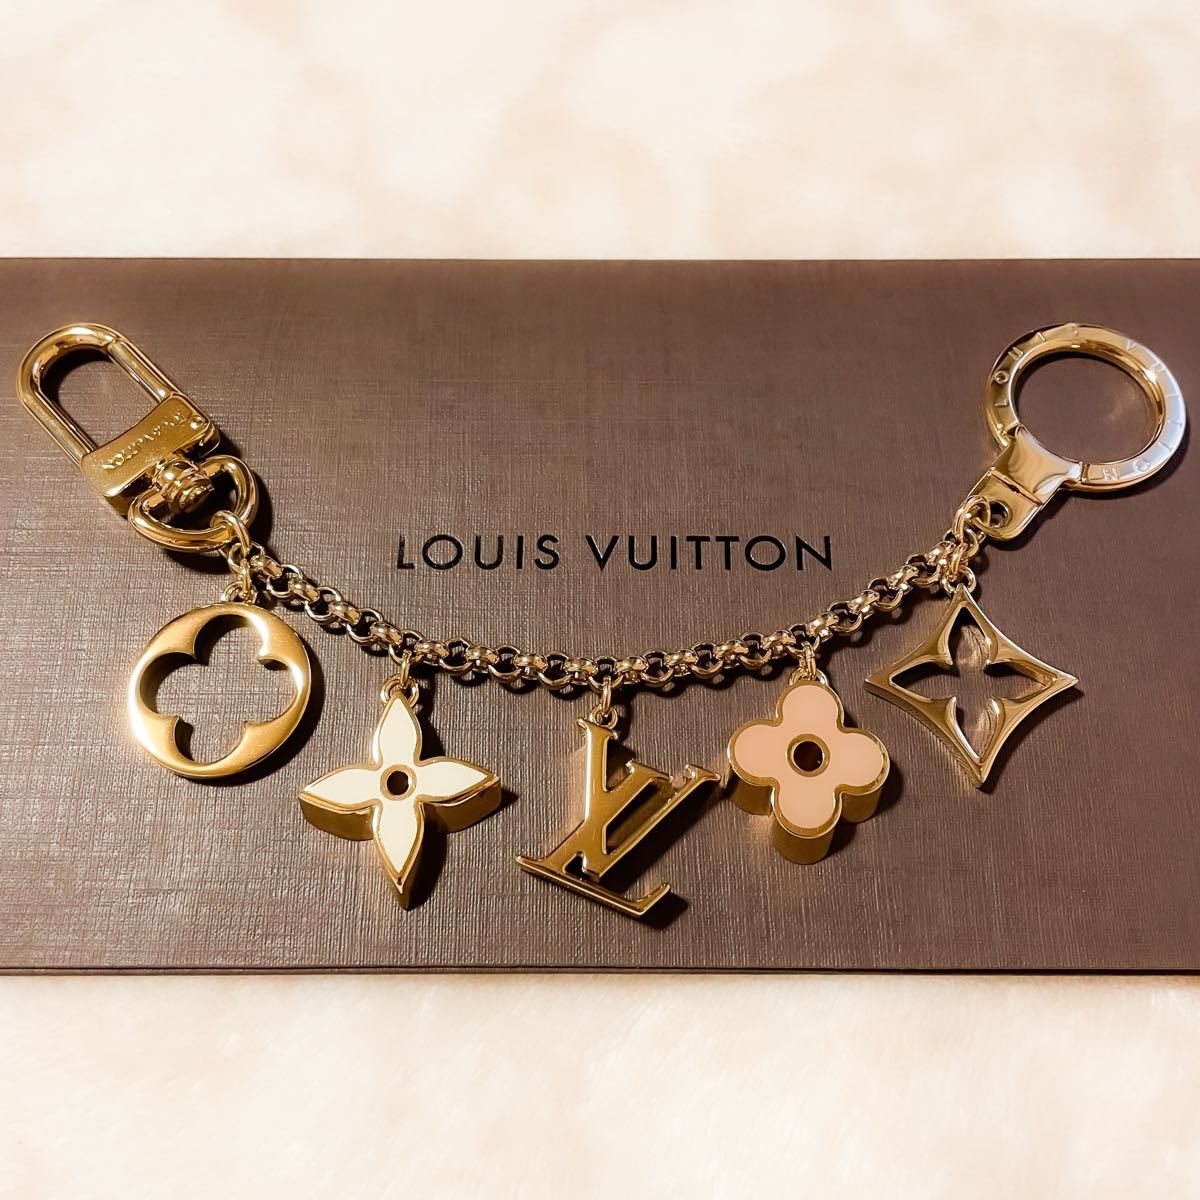 Louis Vuitton(ルイヴィトン)○バッグ チャーム チェーン フルール